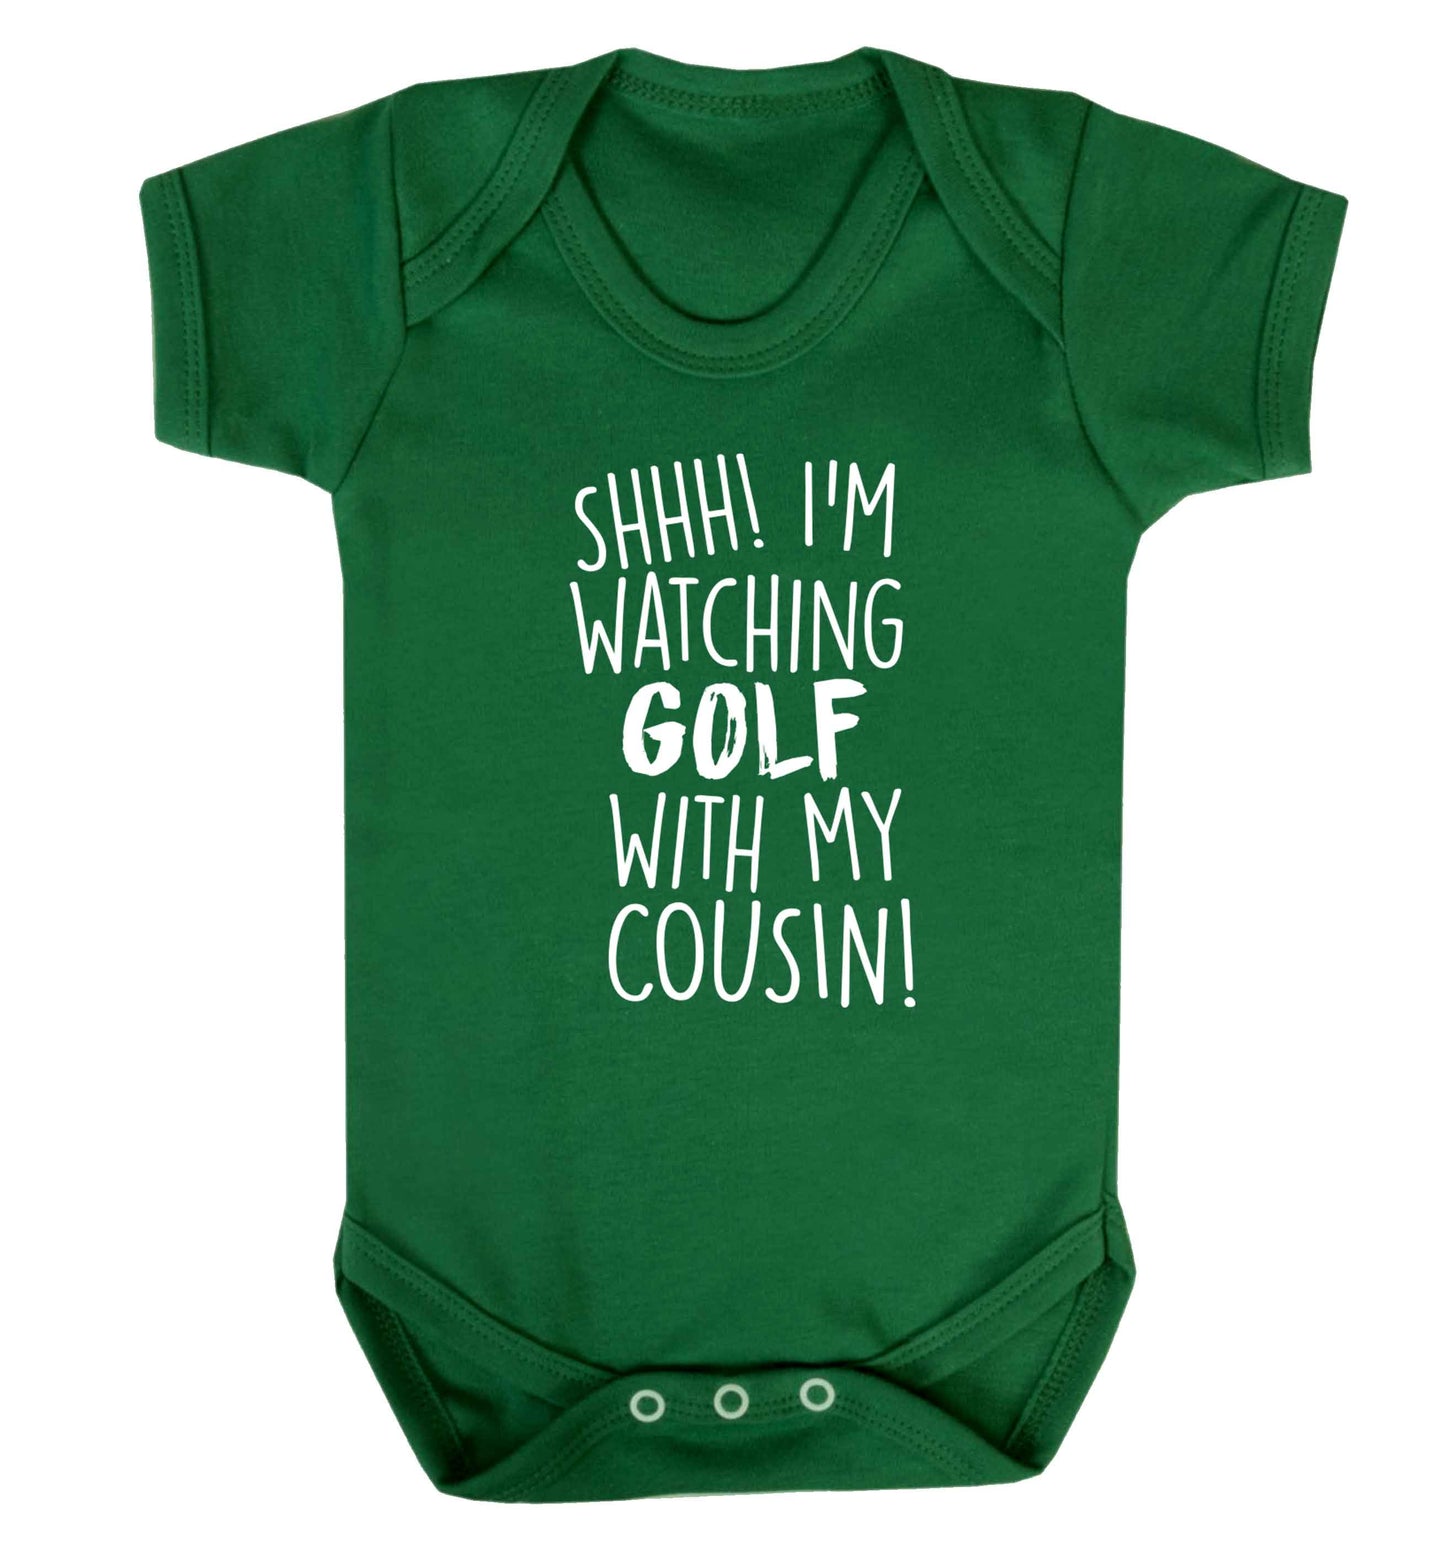 Shh I'm watching golf with my cousin Baby Vest green 18-24 months